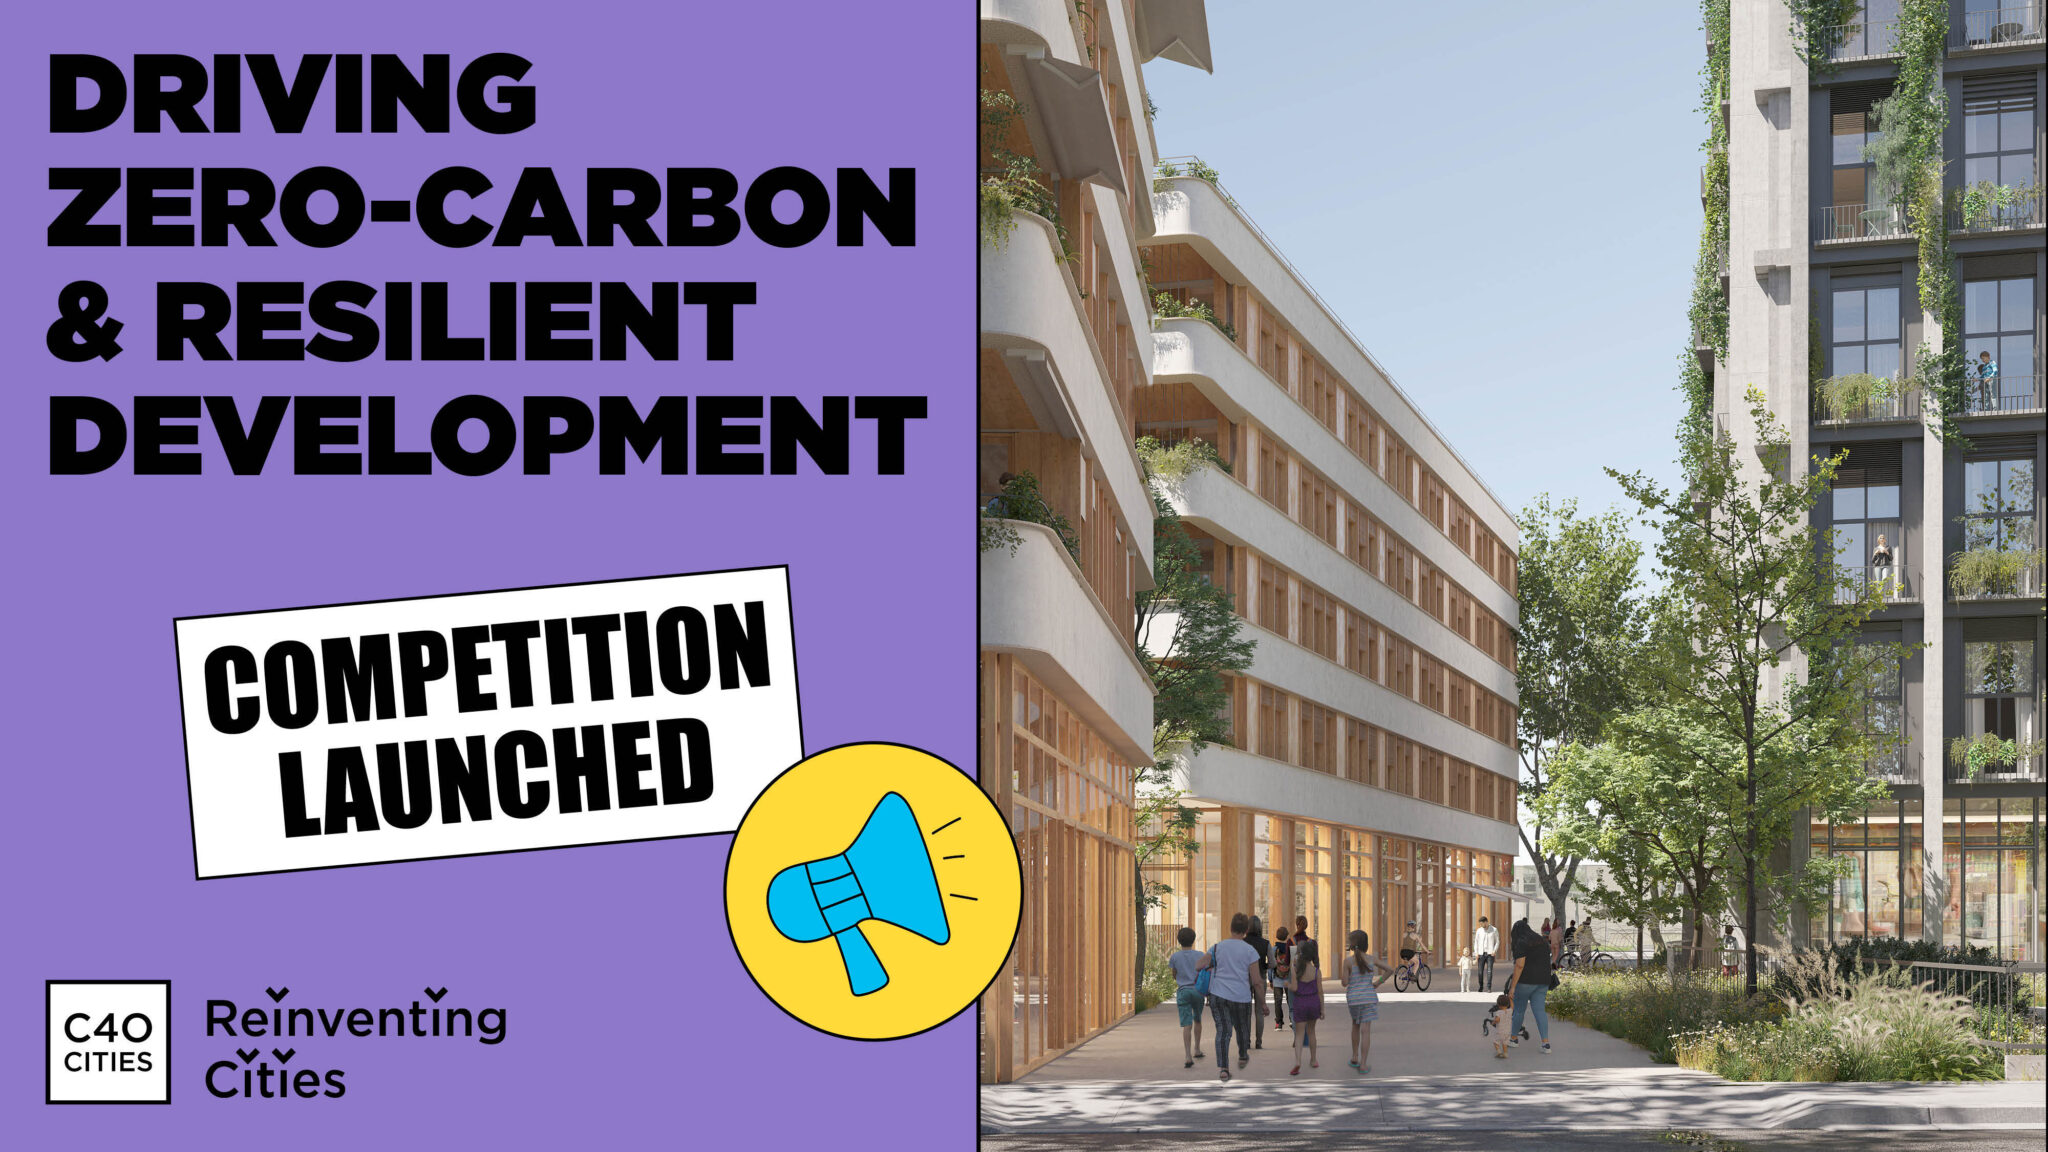 A graphic to announce the C40 Re-inventing Cities competition. The left side of the graphic says "Driving Zero-Carbon & Resilient Development" Competition Launched, with a megaphone icon all behind a purple backdrop. The right hand side of the image is the photo of people walking through a plaza, with a short building on the left side and a taller building on the right side. There are trees in the plaza and you can see green plants growing on the taller building, like vines stretching up to the top.